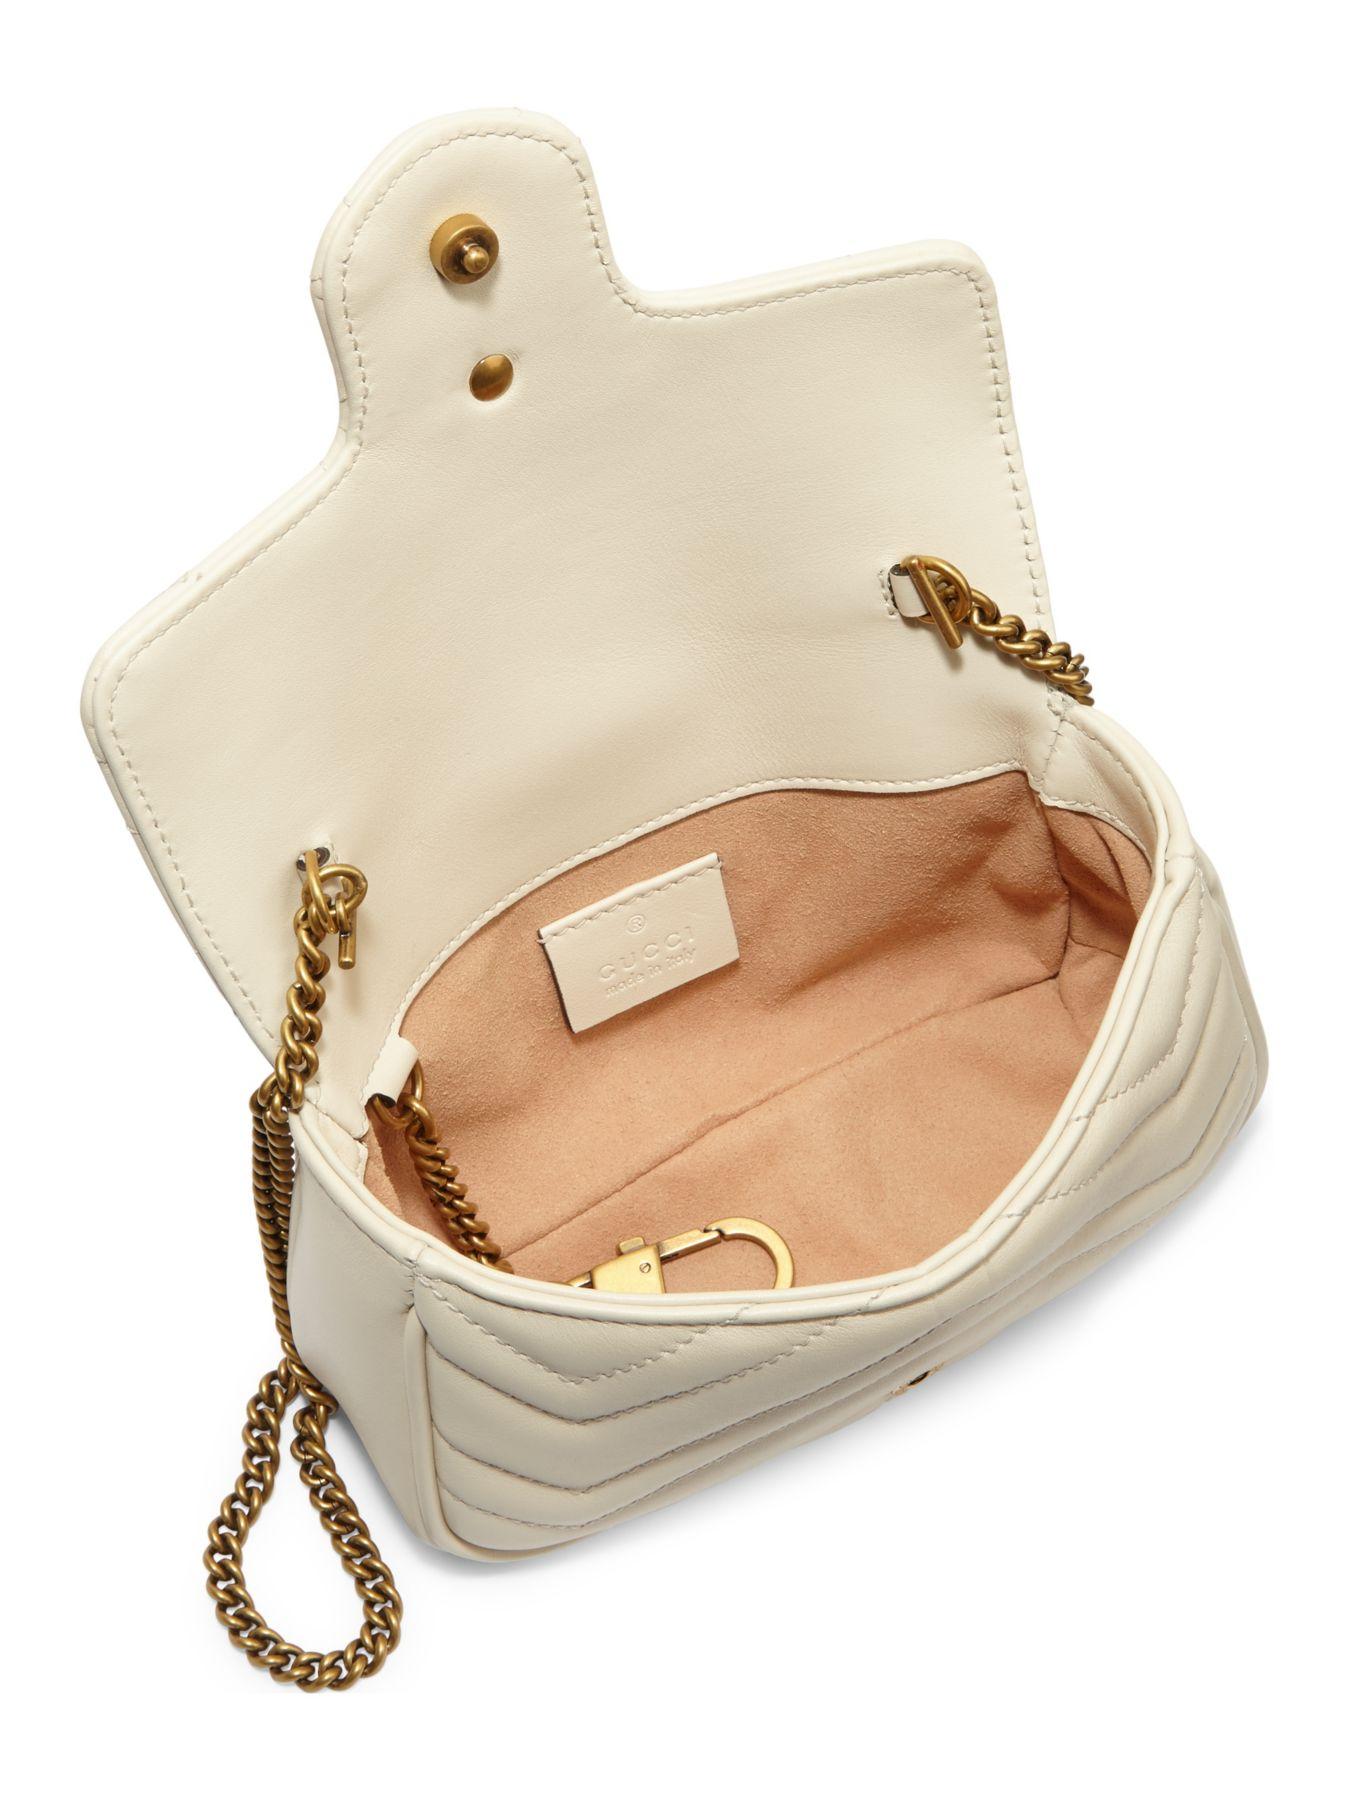 Gucci Gg Marmont Matelasse Leather Mini Chain Shoulder Bag in White - Lyst